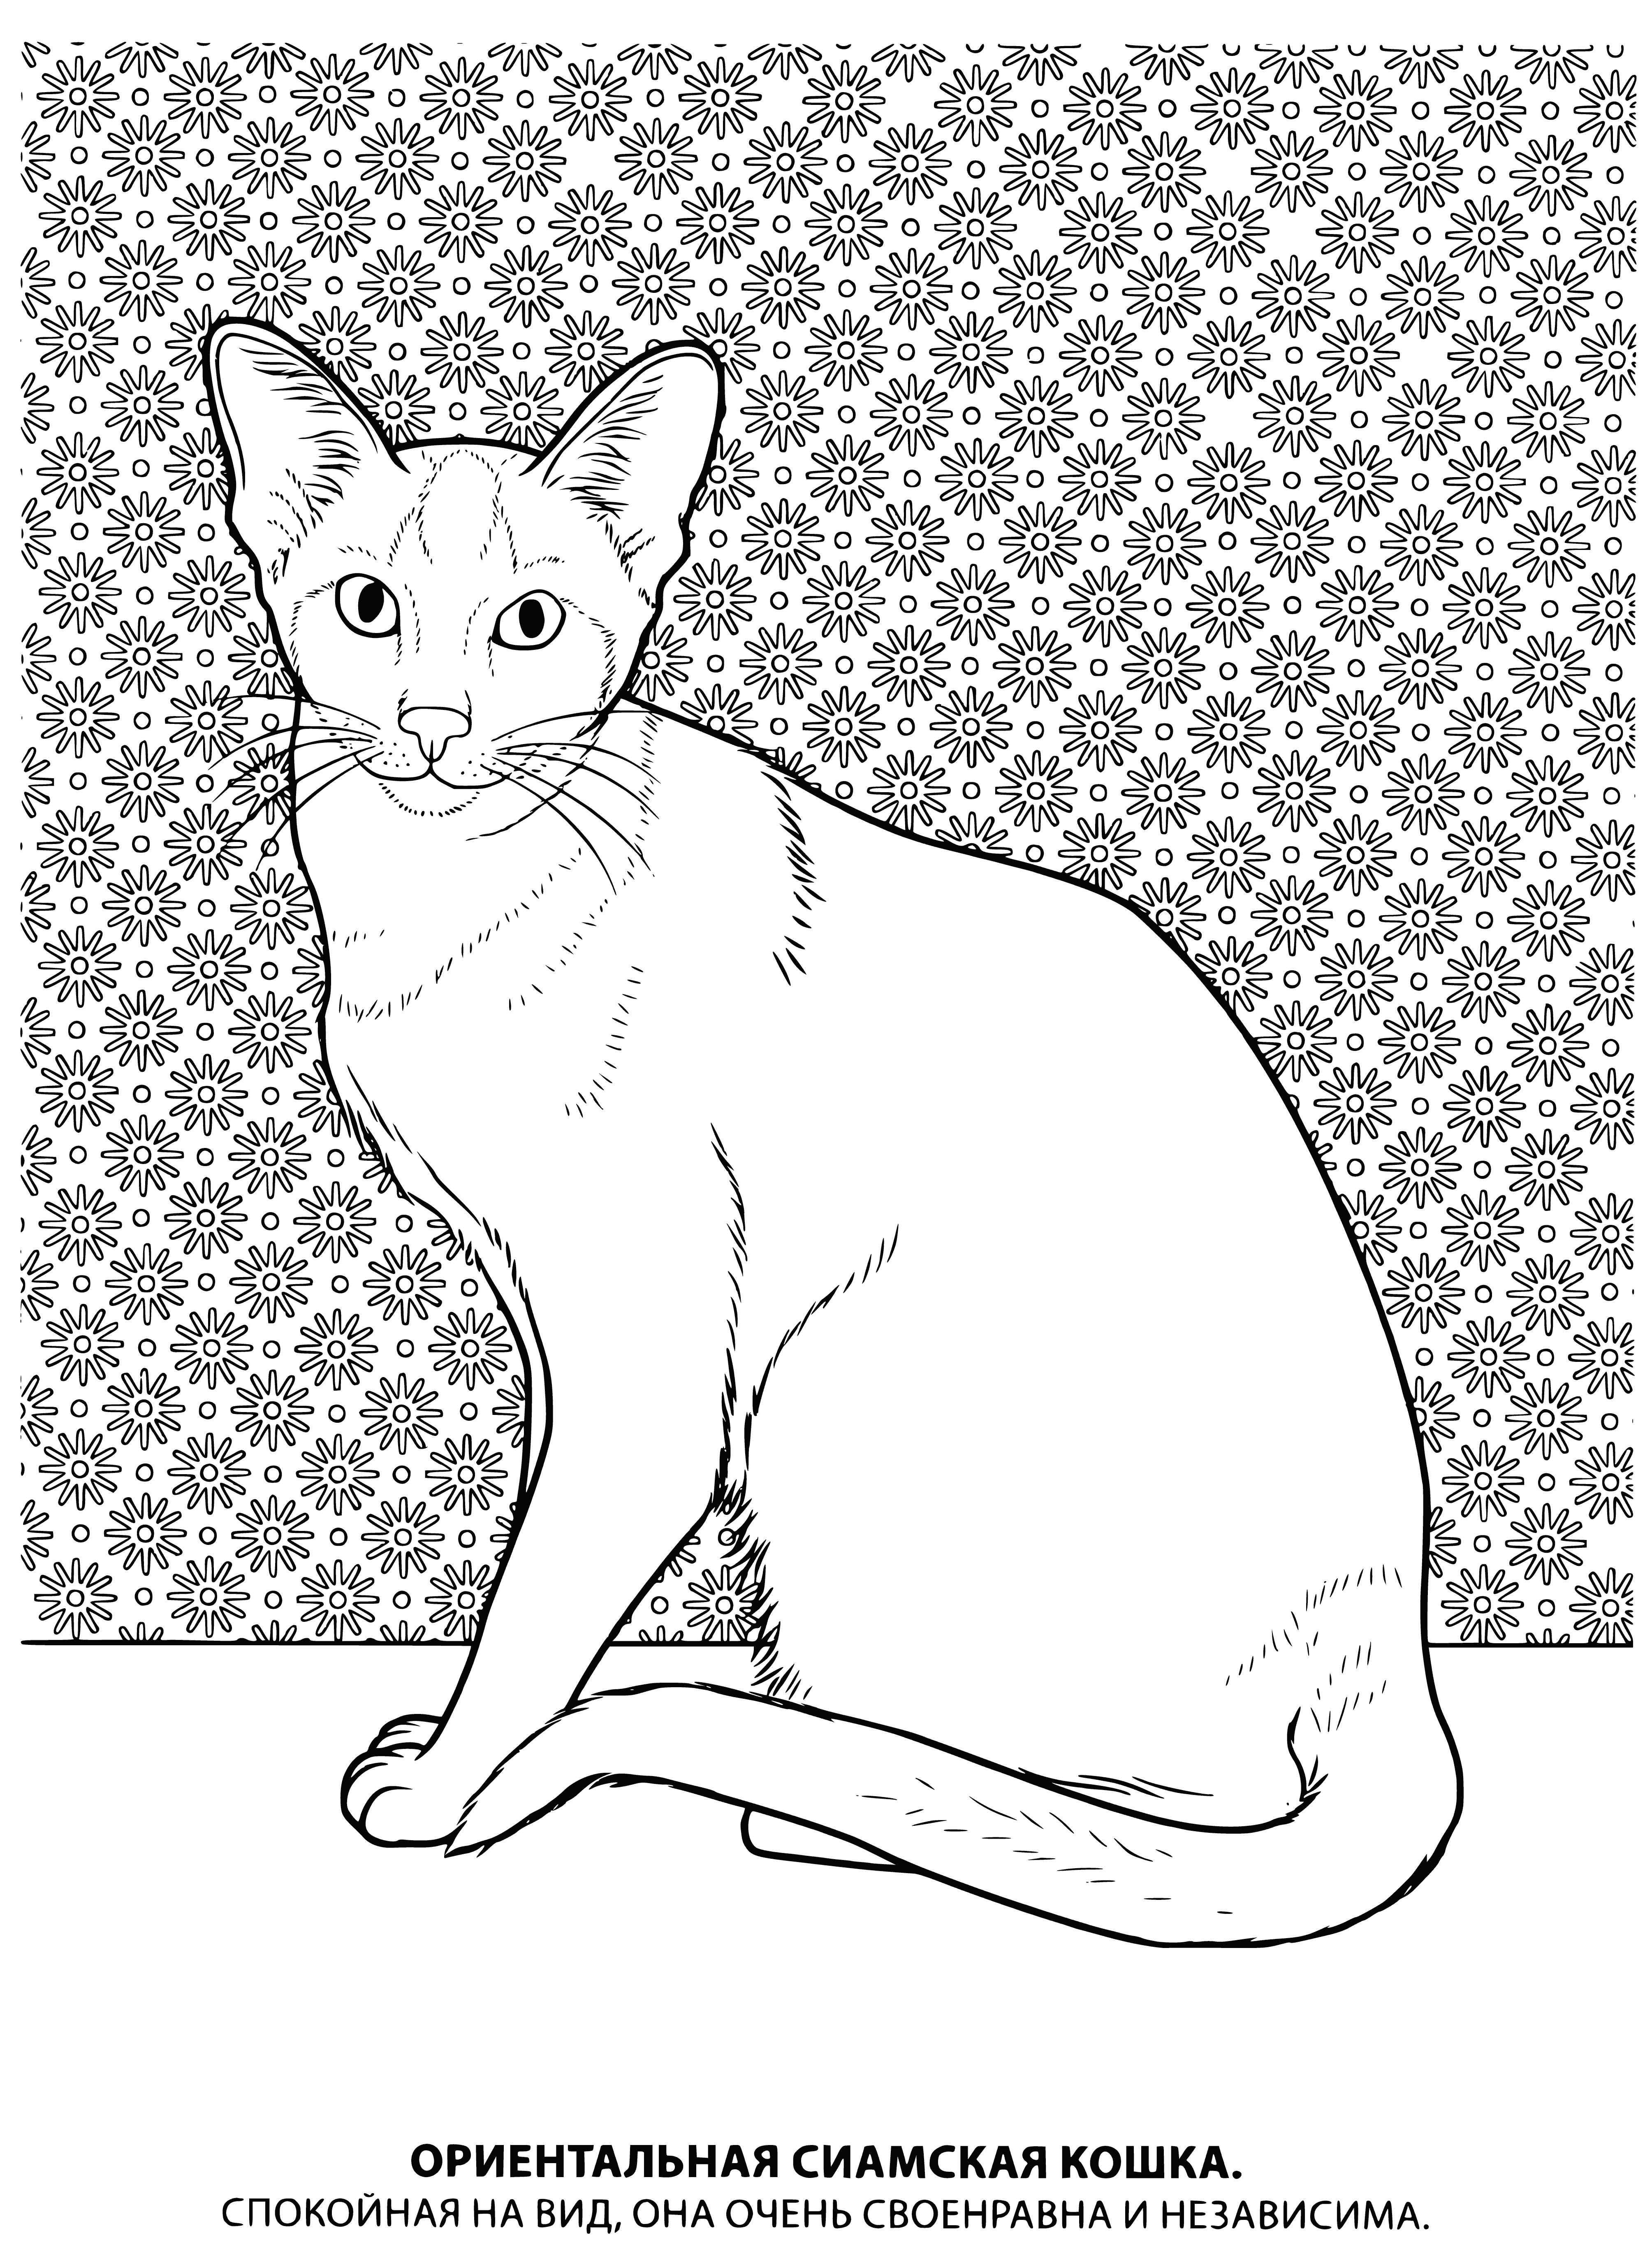 Oriental siamese cat coloring page